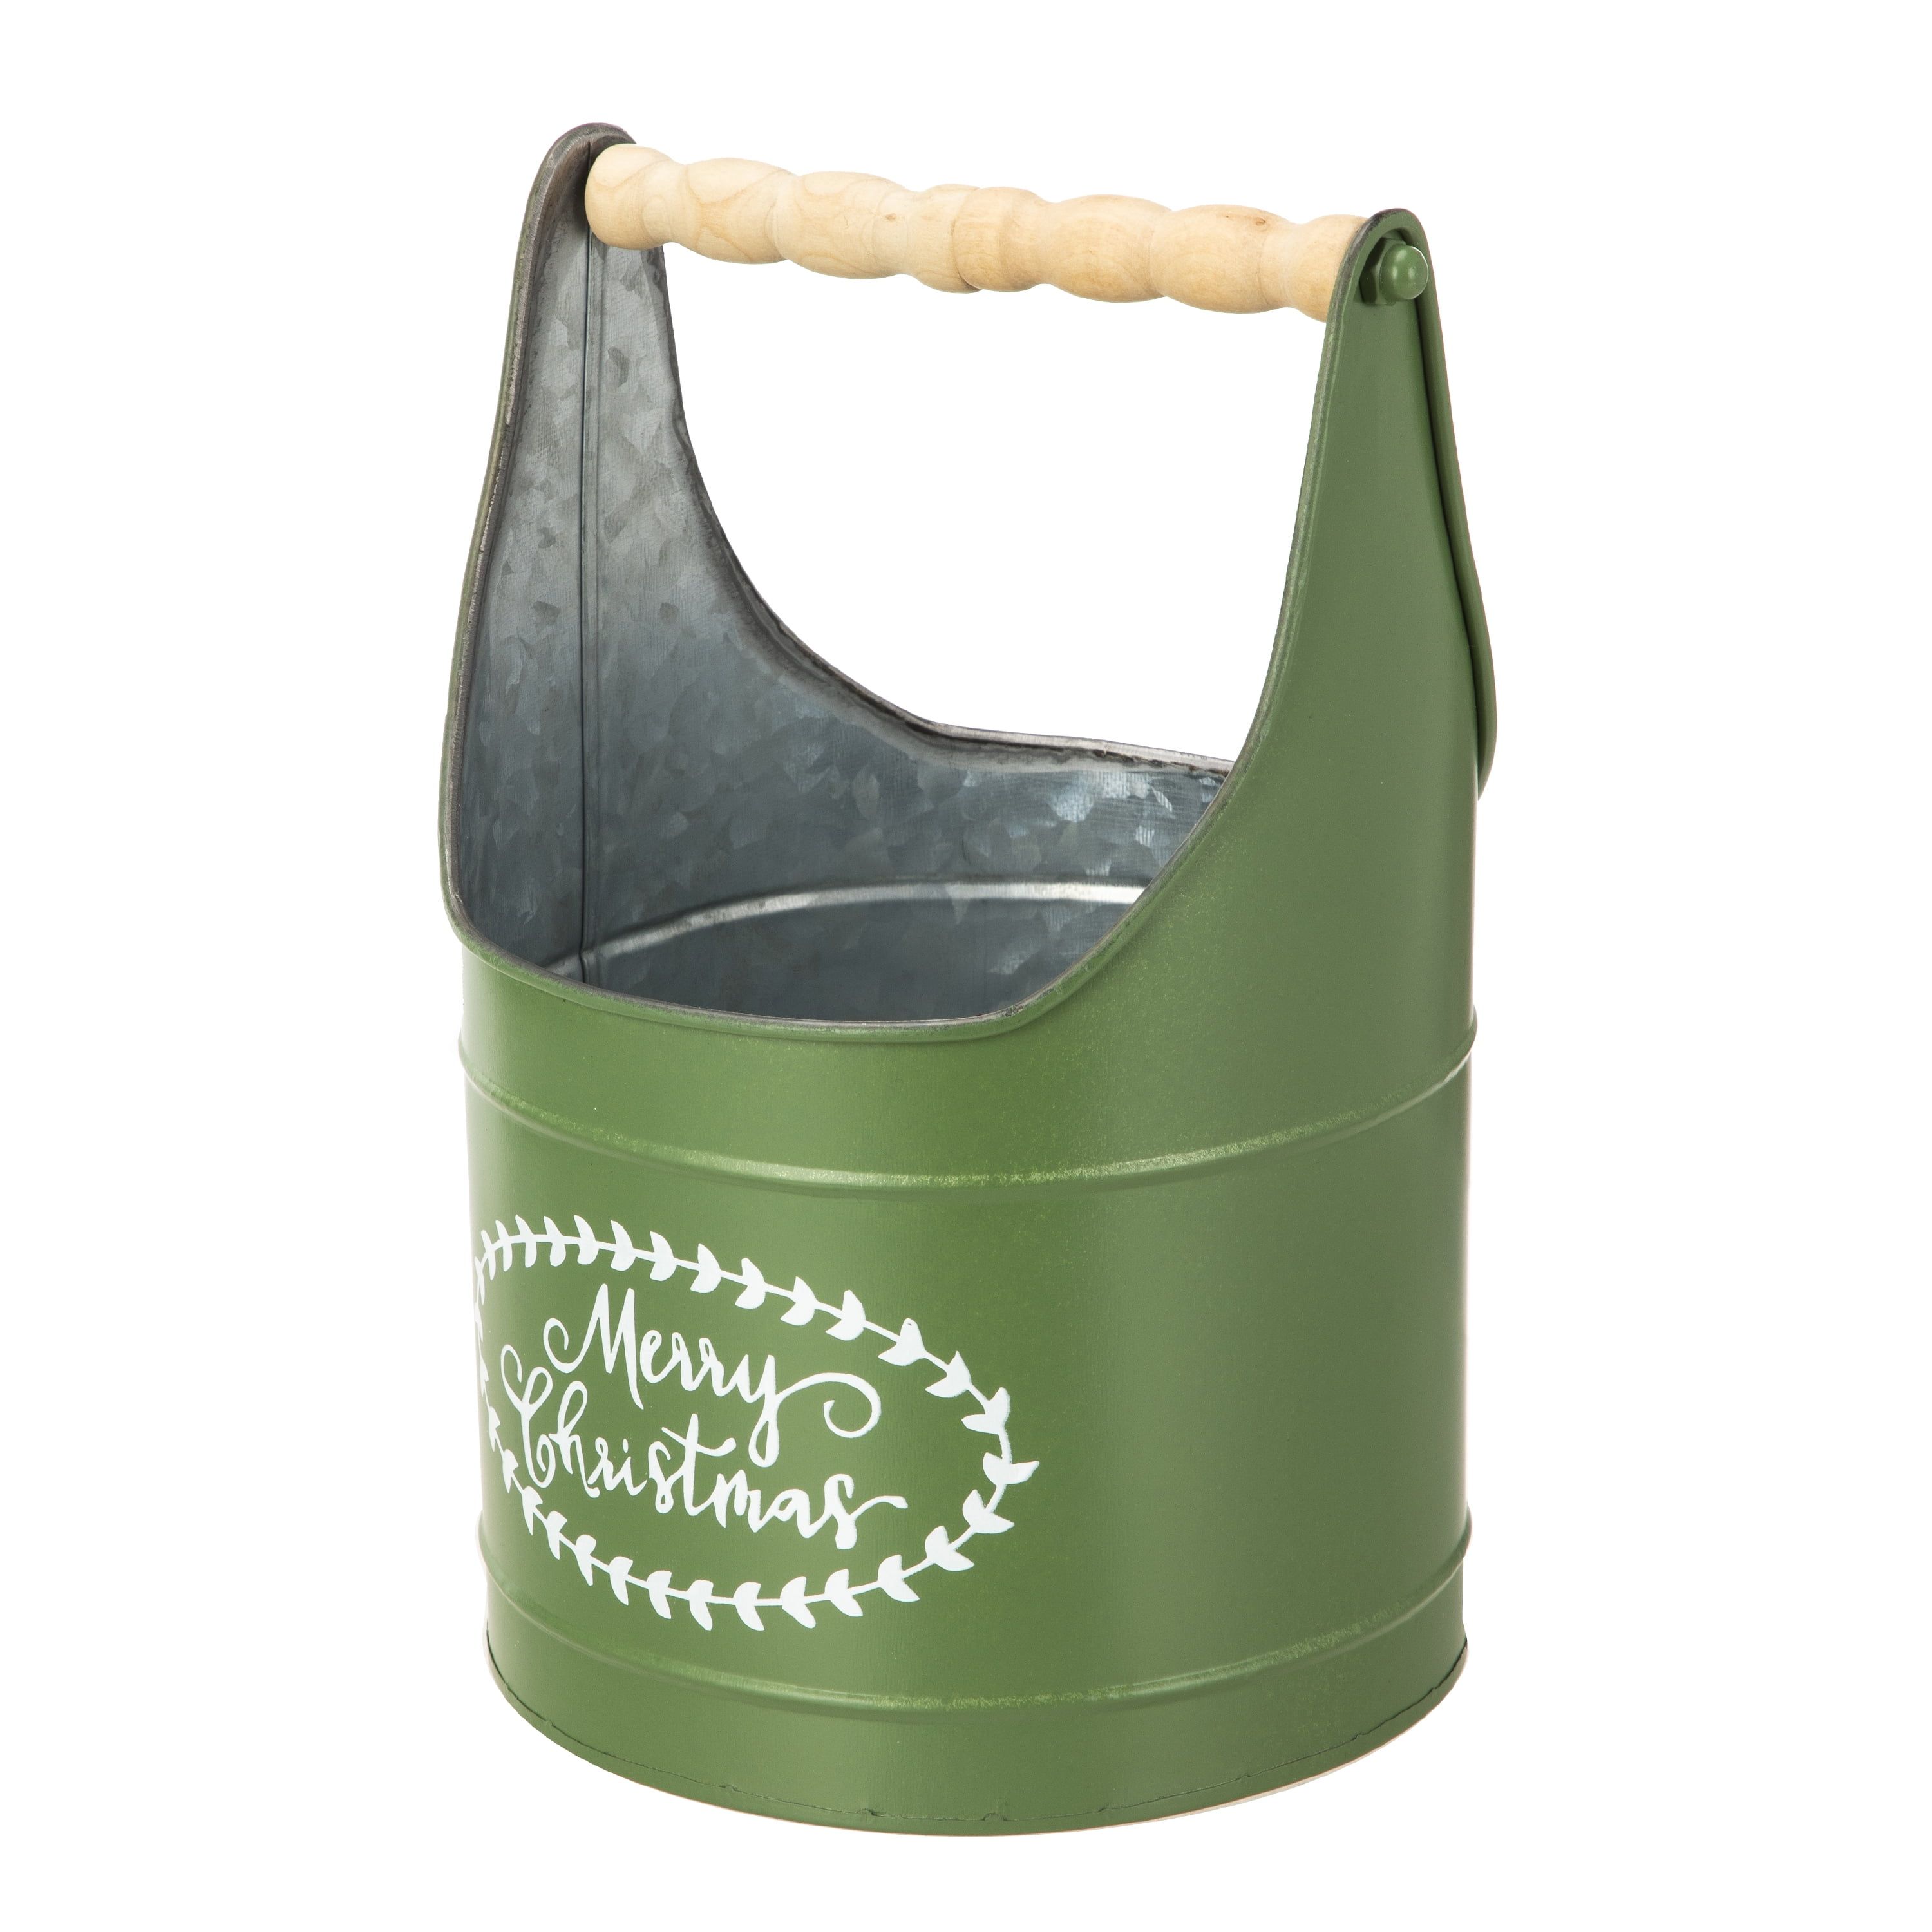 Holiday Time Small Metal Bucket Tabletop Decoration, Green | Walmart (US)